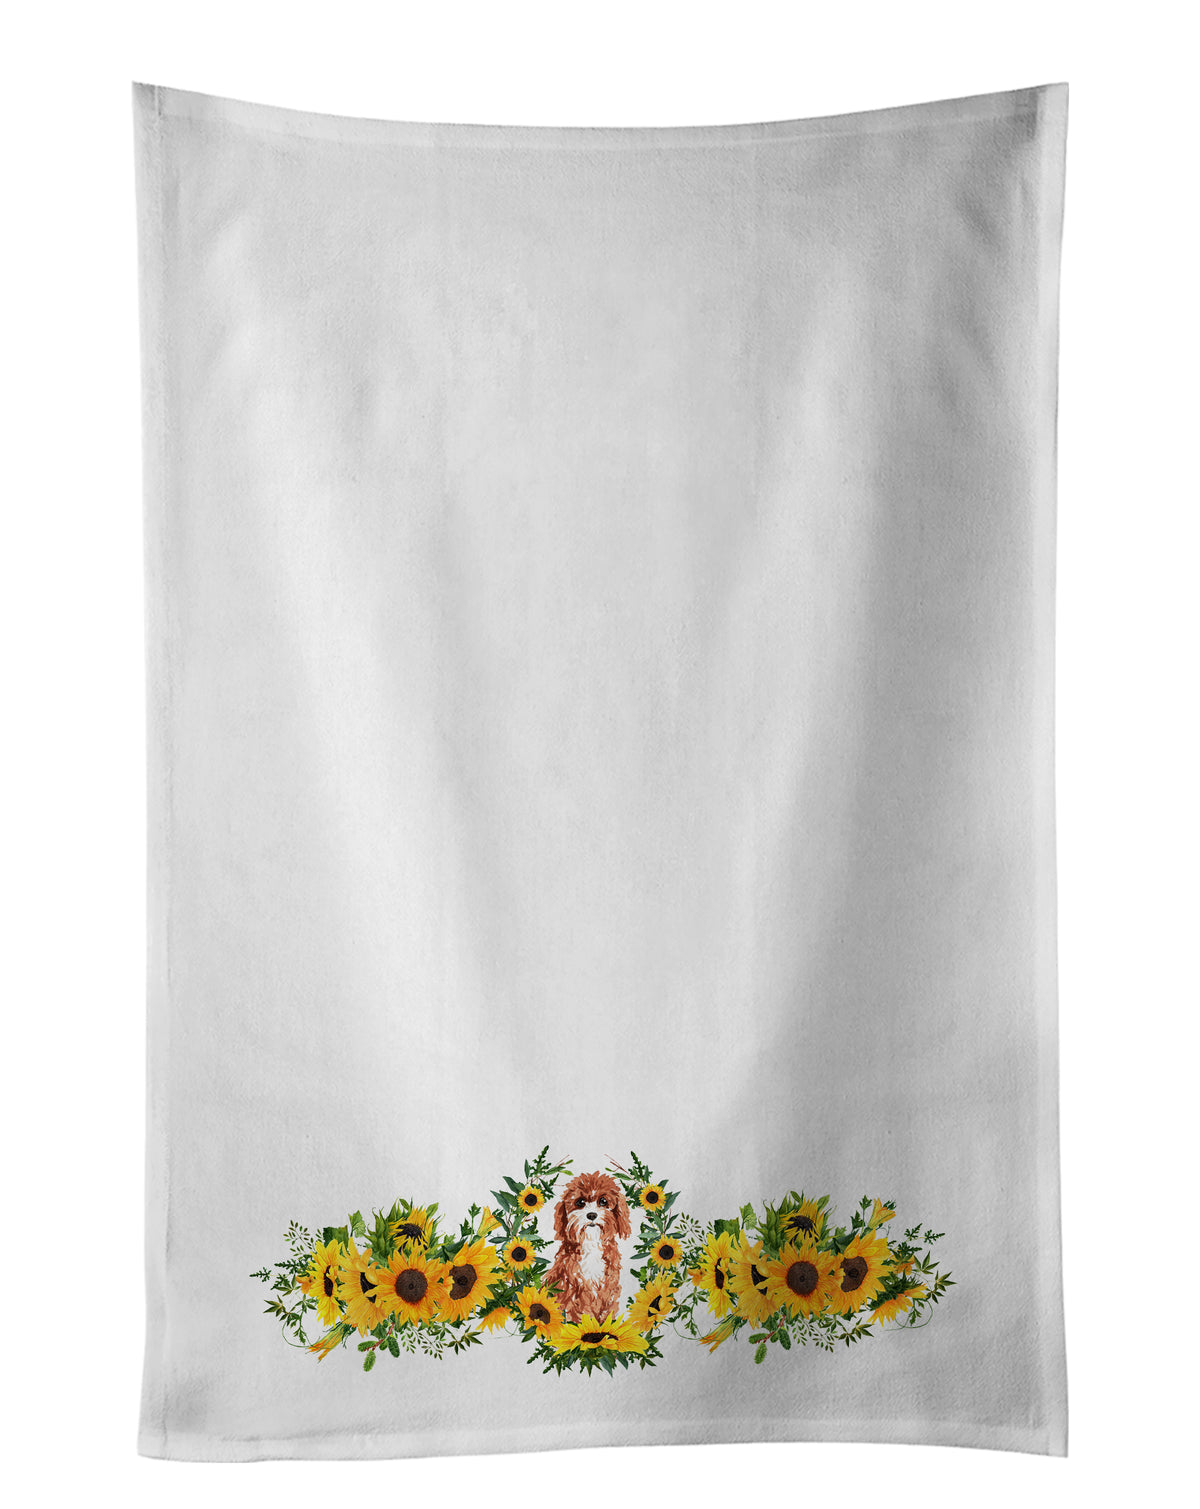 Buy this Cavapoo in Sunflowers White Kitchen Towel Set of 2